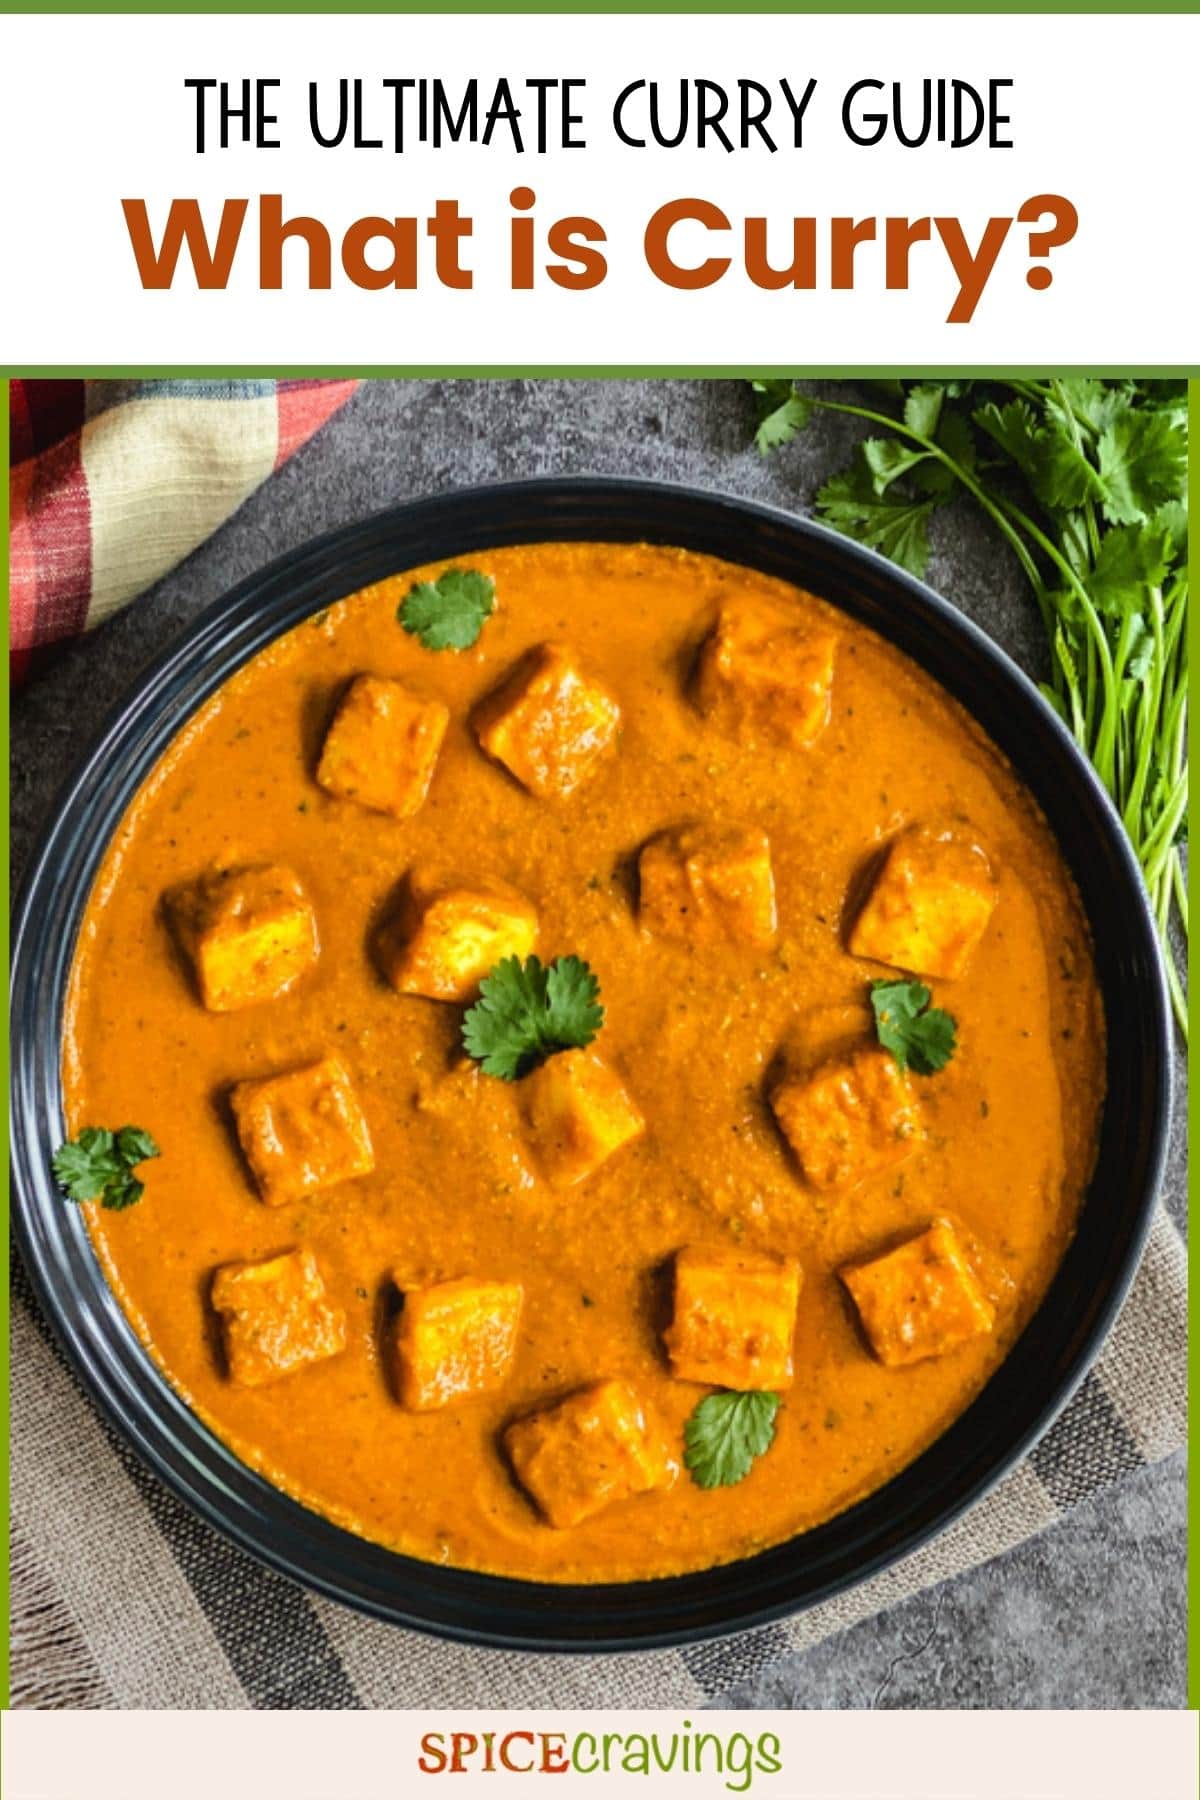 paneer curry in bowl garnished with cilantro leaves